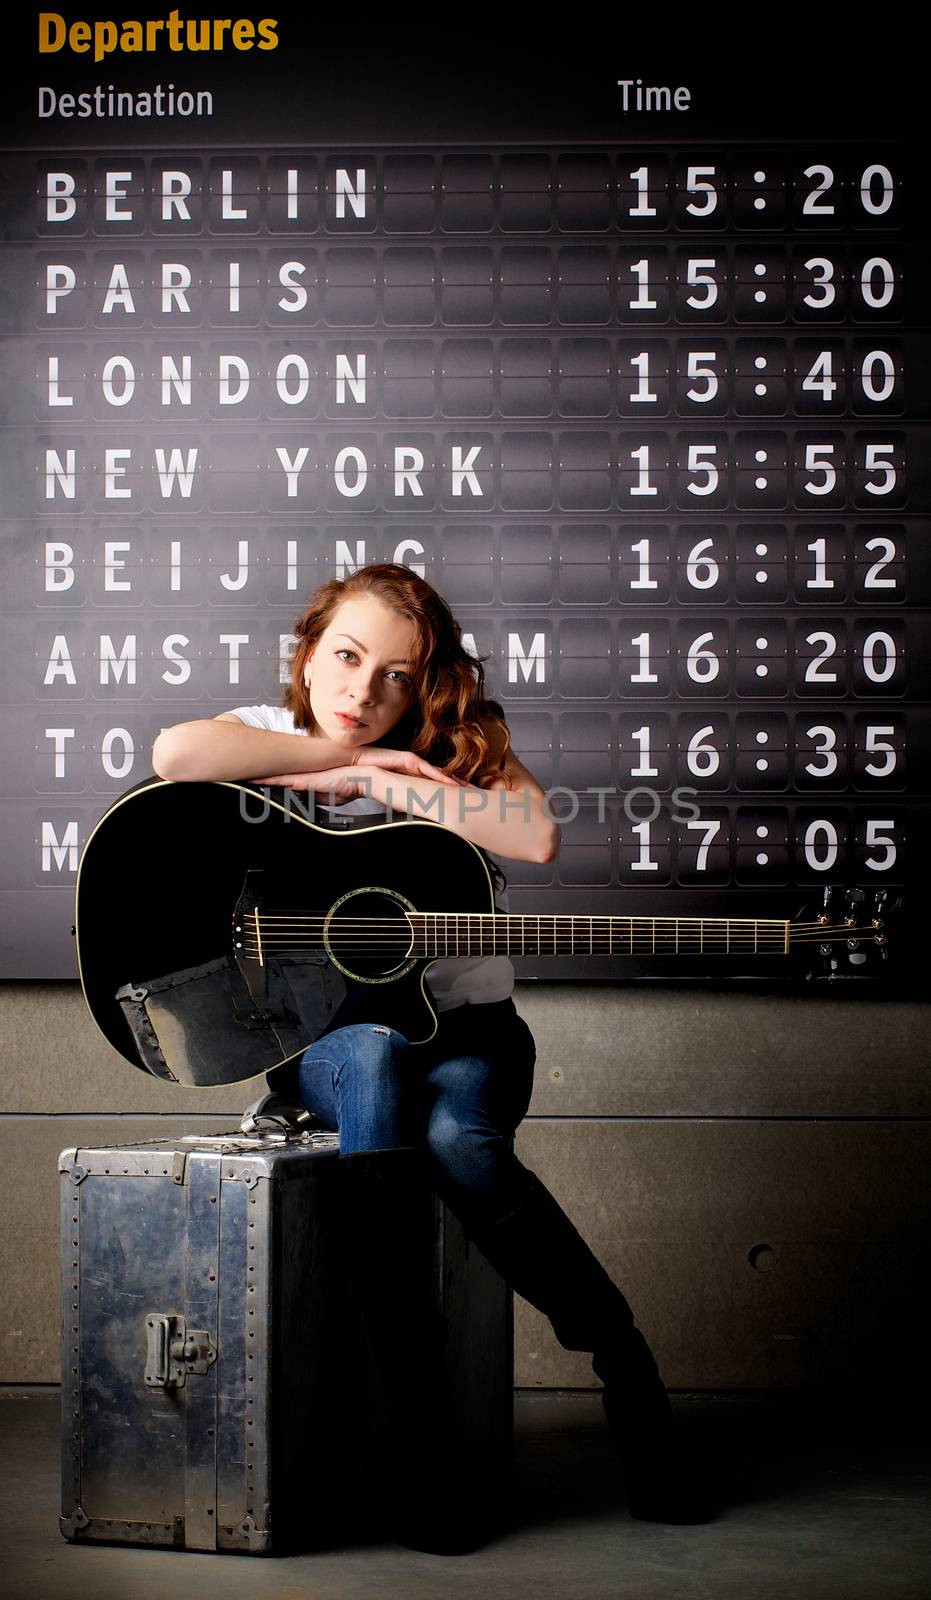 Attractive Young Woman with Guitar Sitting on Obsolete Suitcase against Arrival  Departure Board